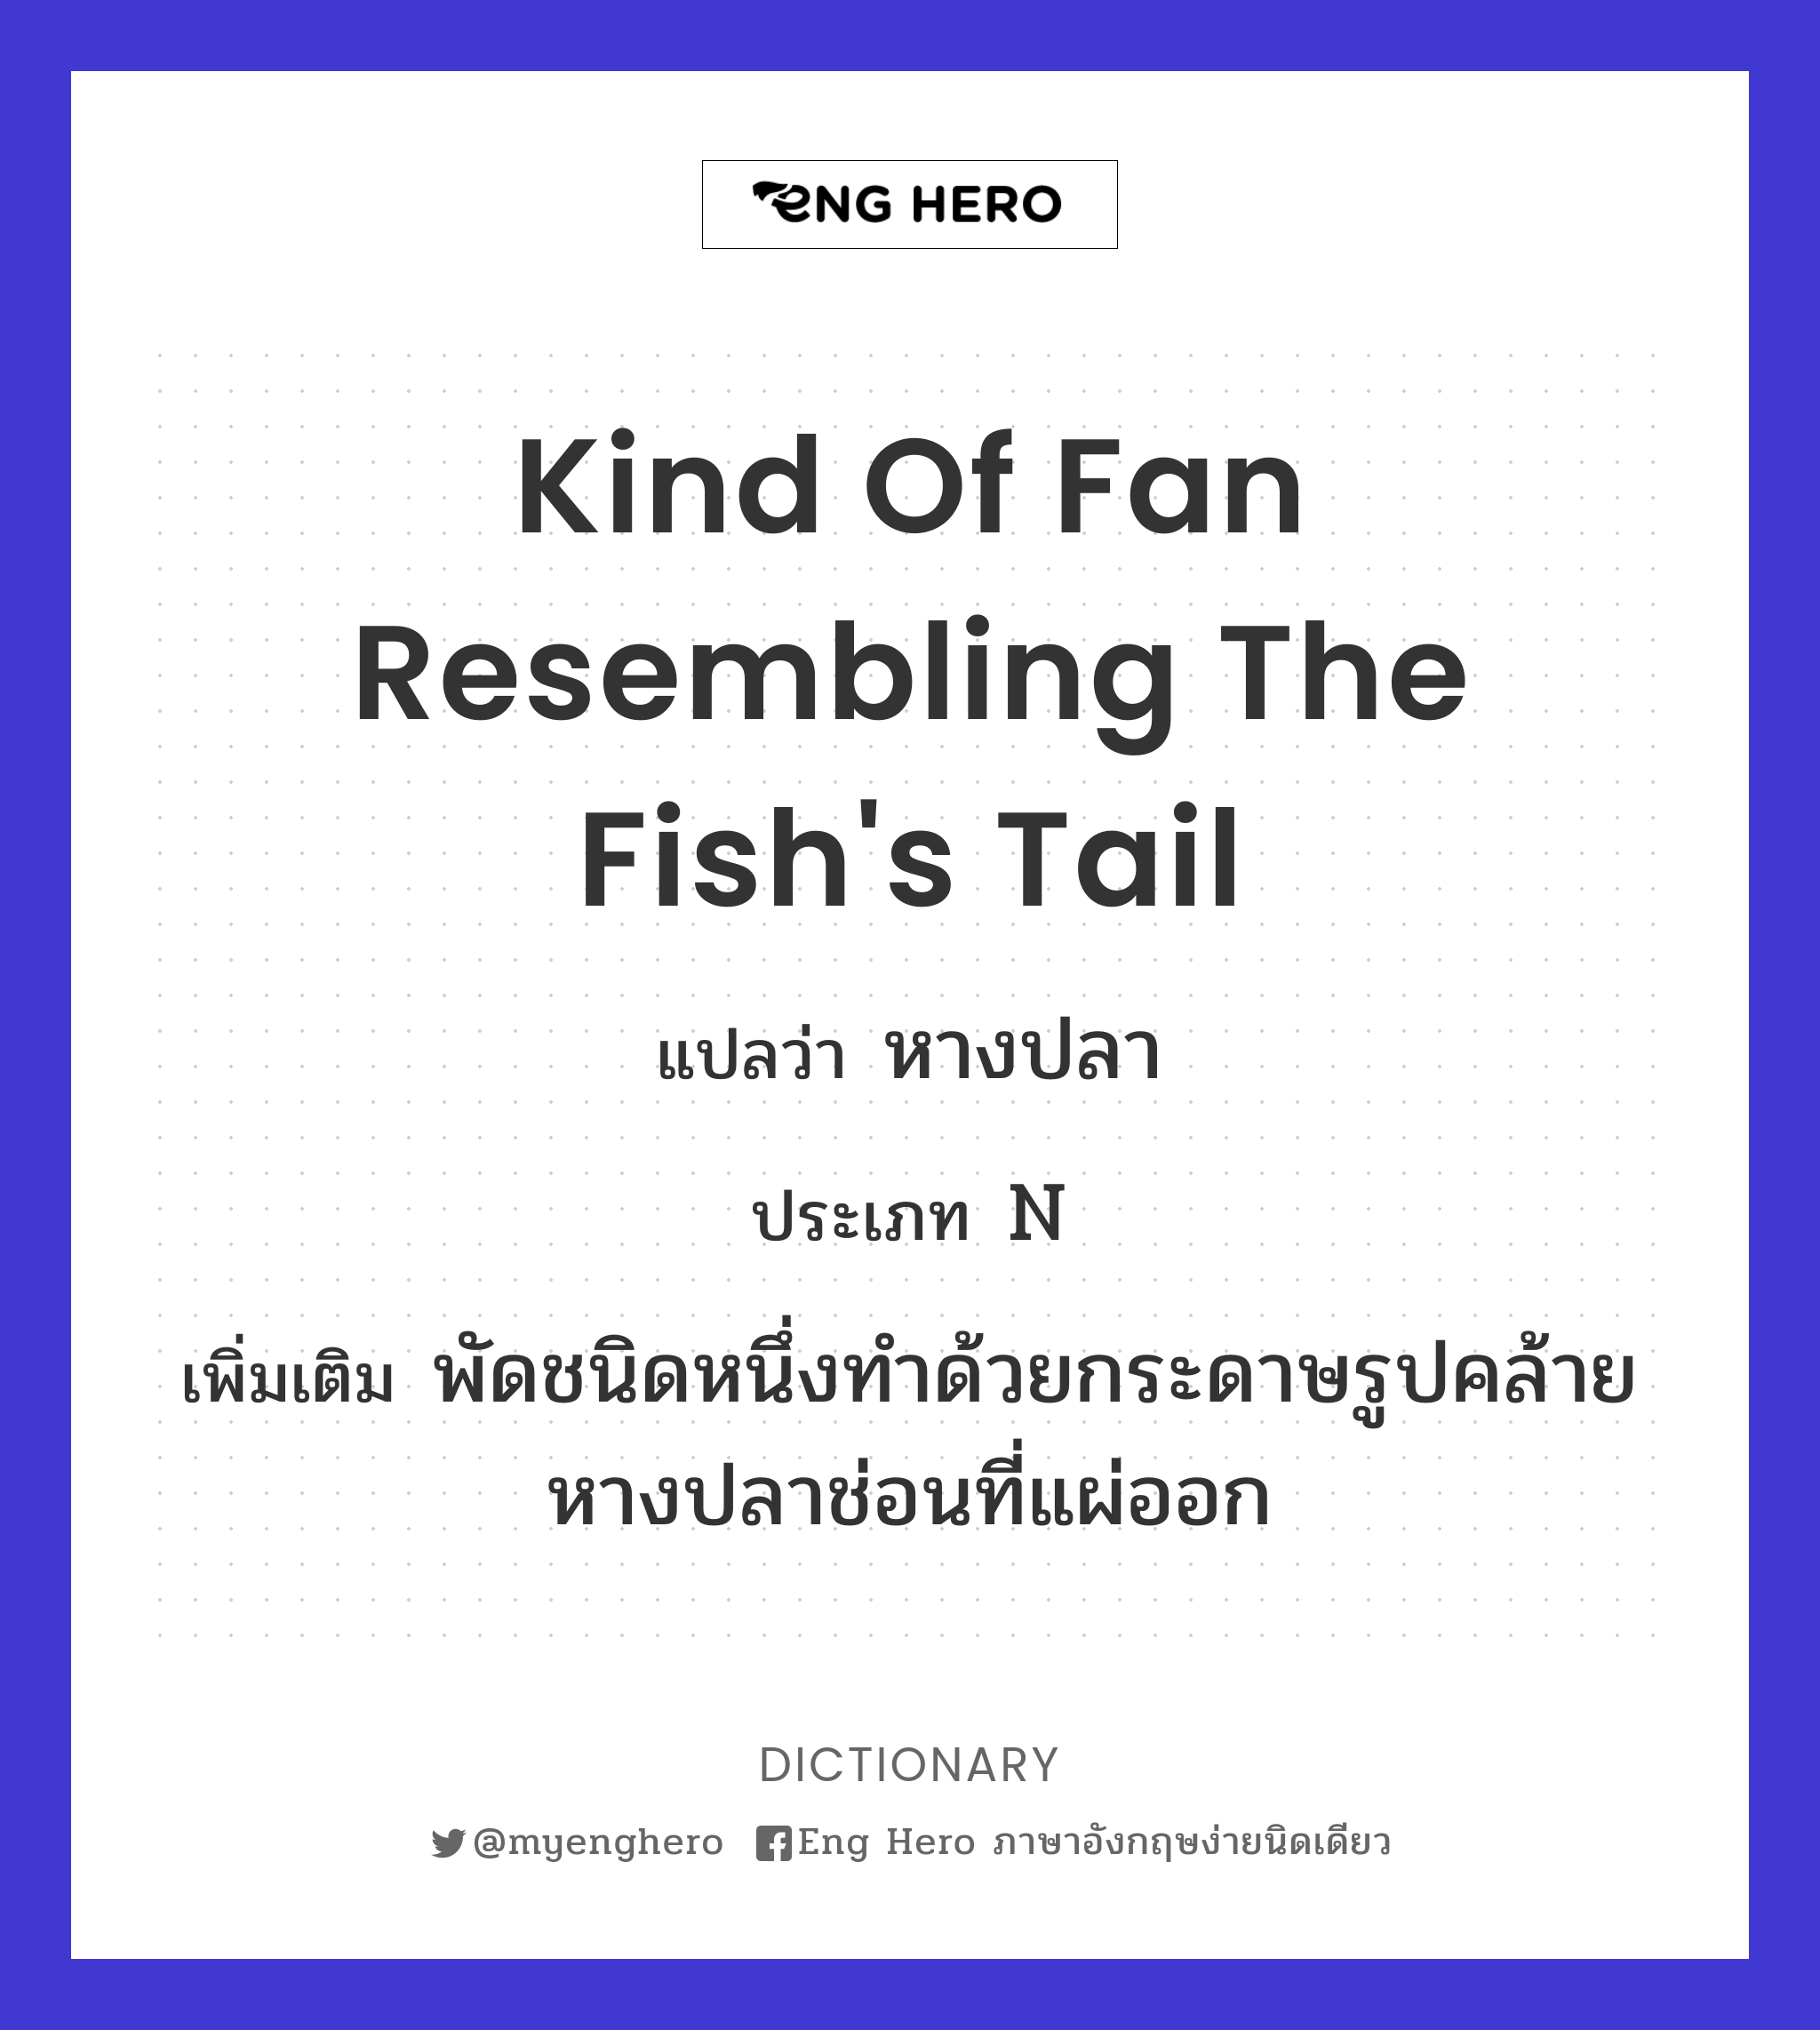 kind of fan resembling the fish's tail